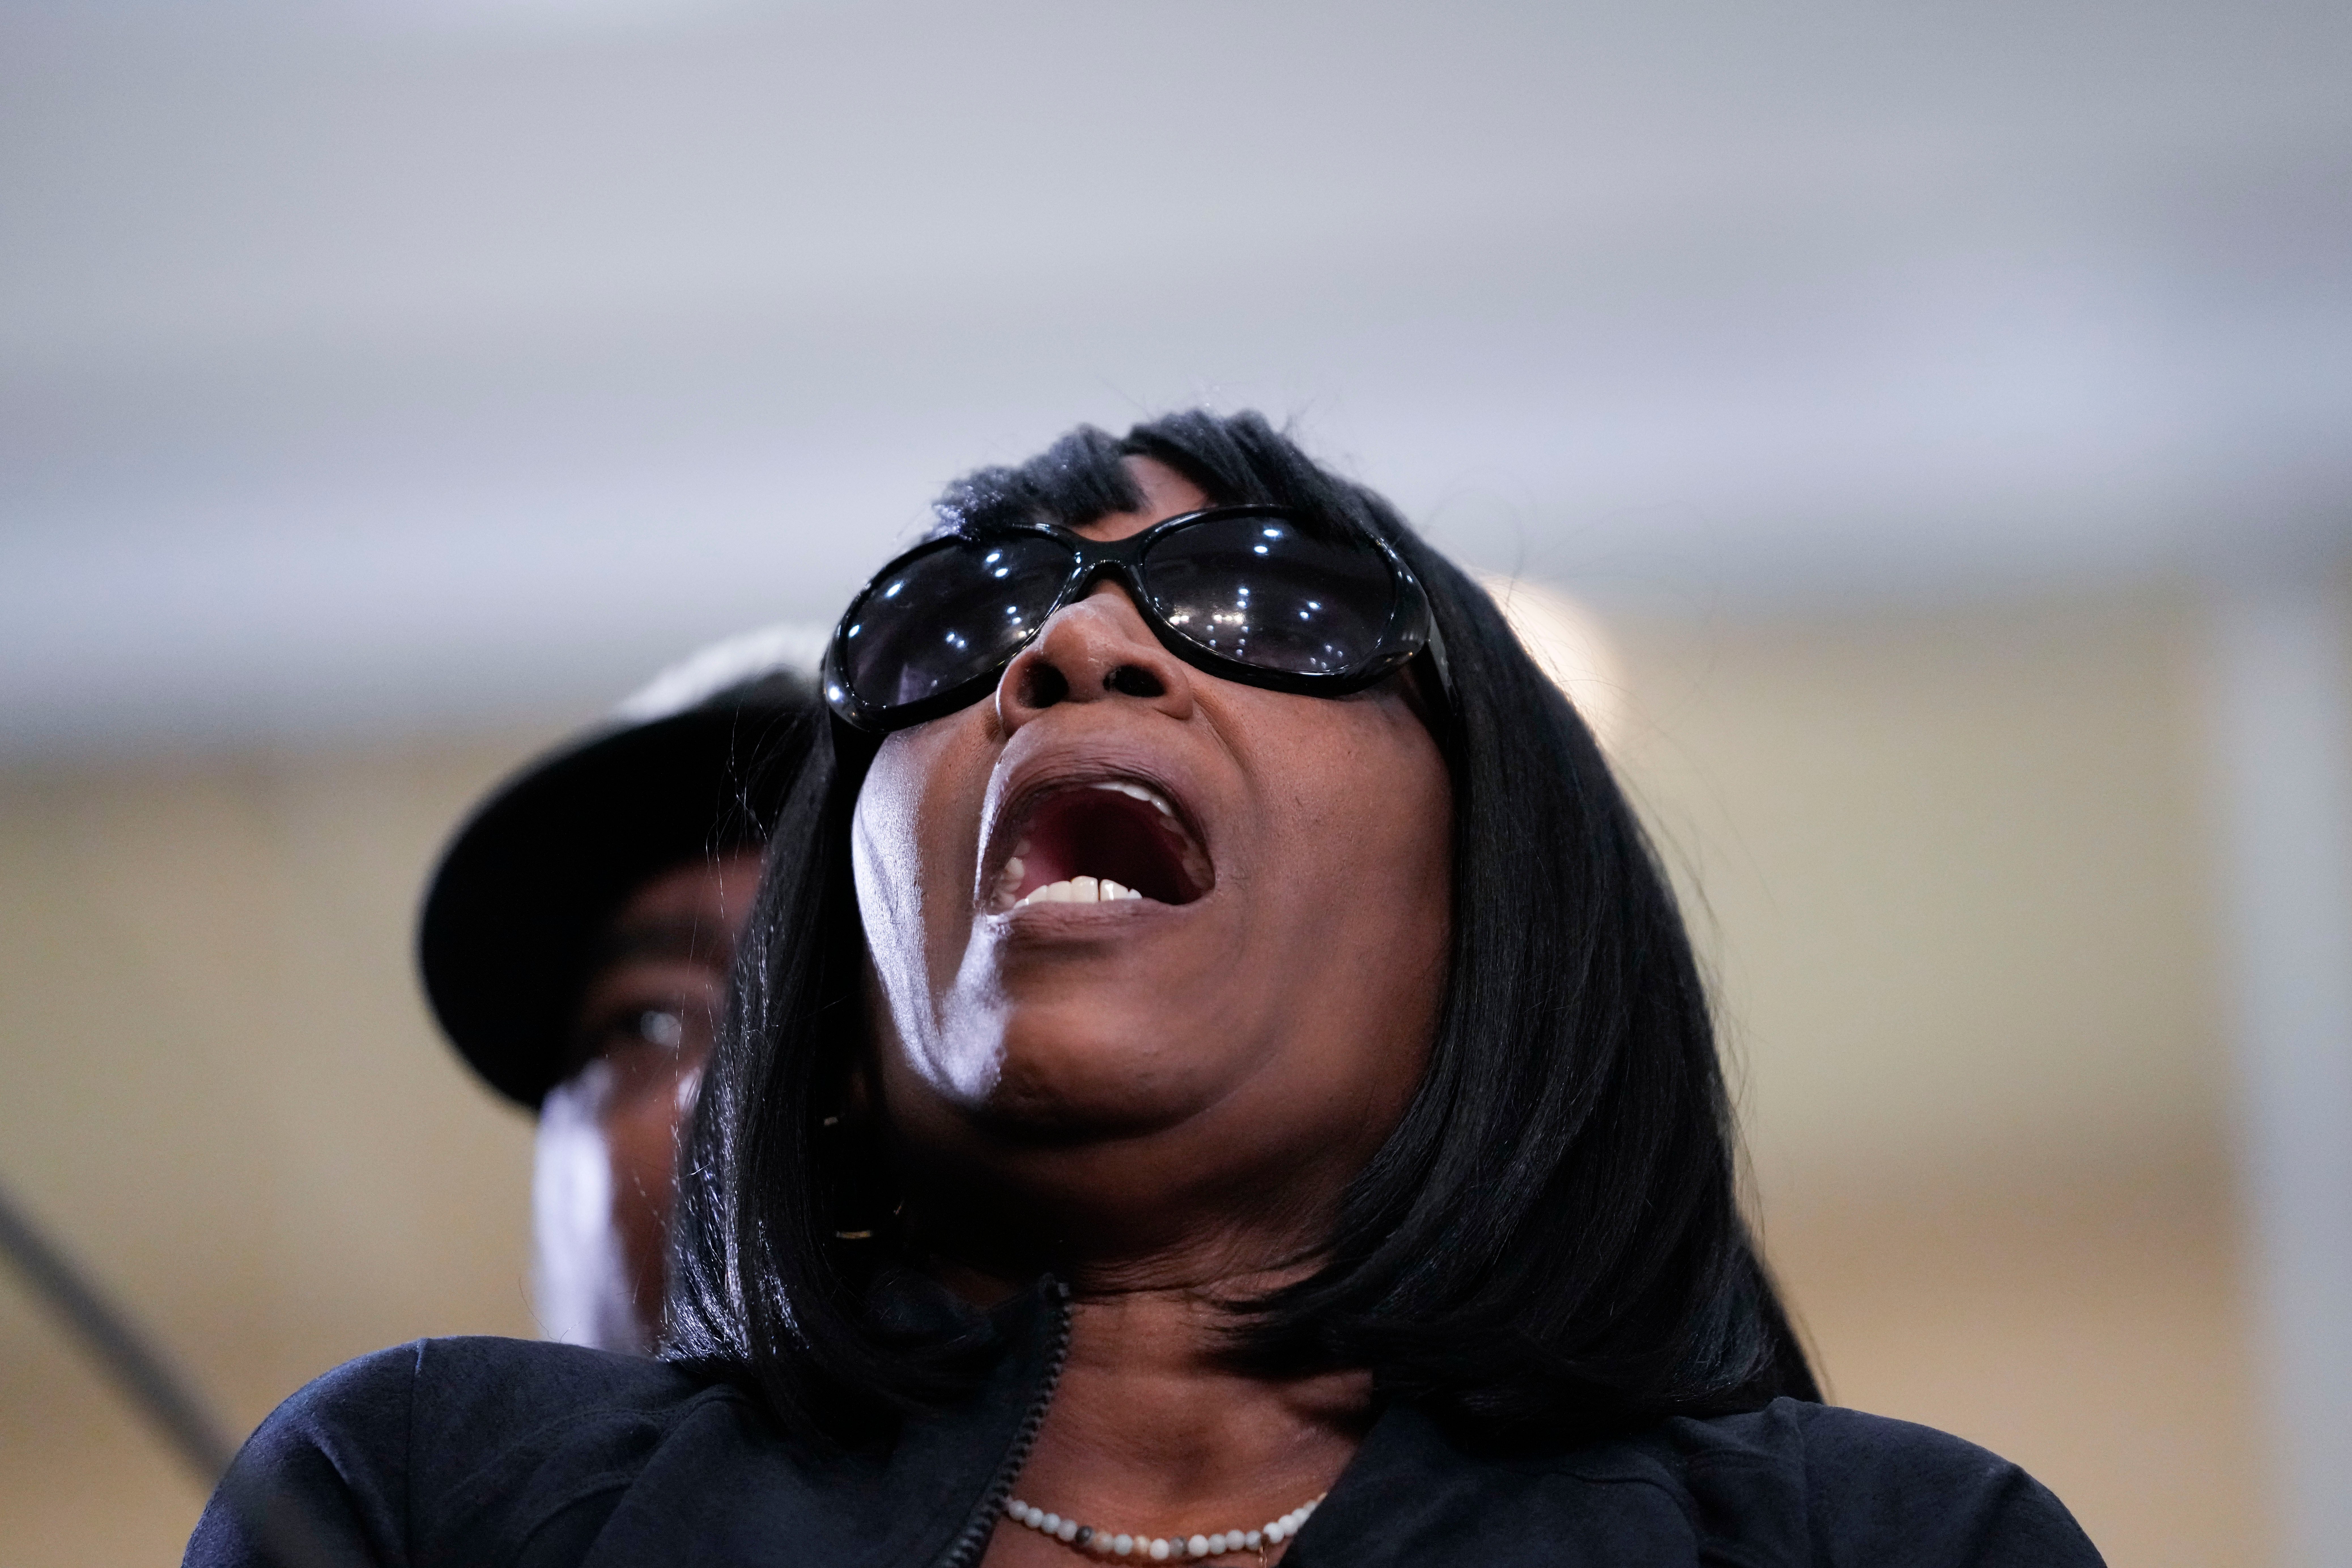 RowVaughn Wells, mother of Tyre Nichols, calls out her son’s name as she is comforted by his stepfather Rodney Wells, at a news conference in Memphis, Tennessee